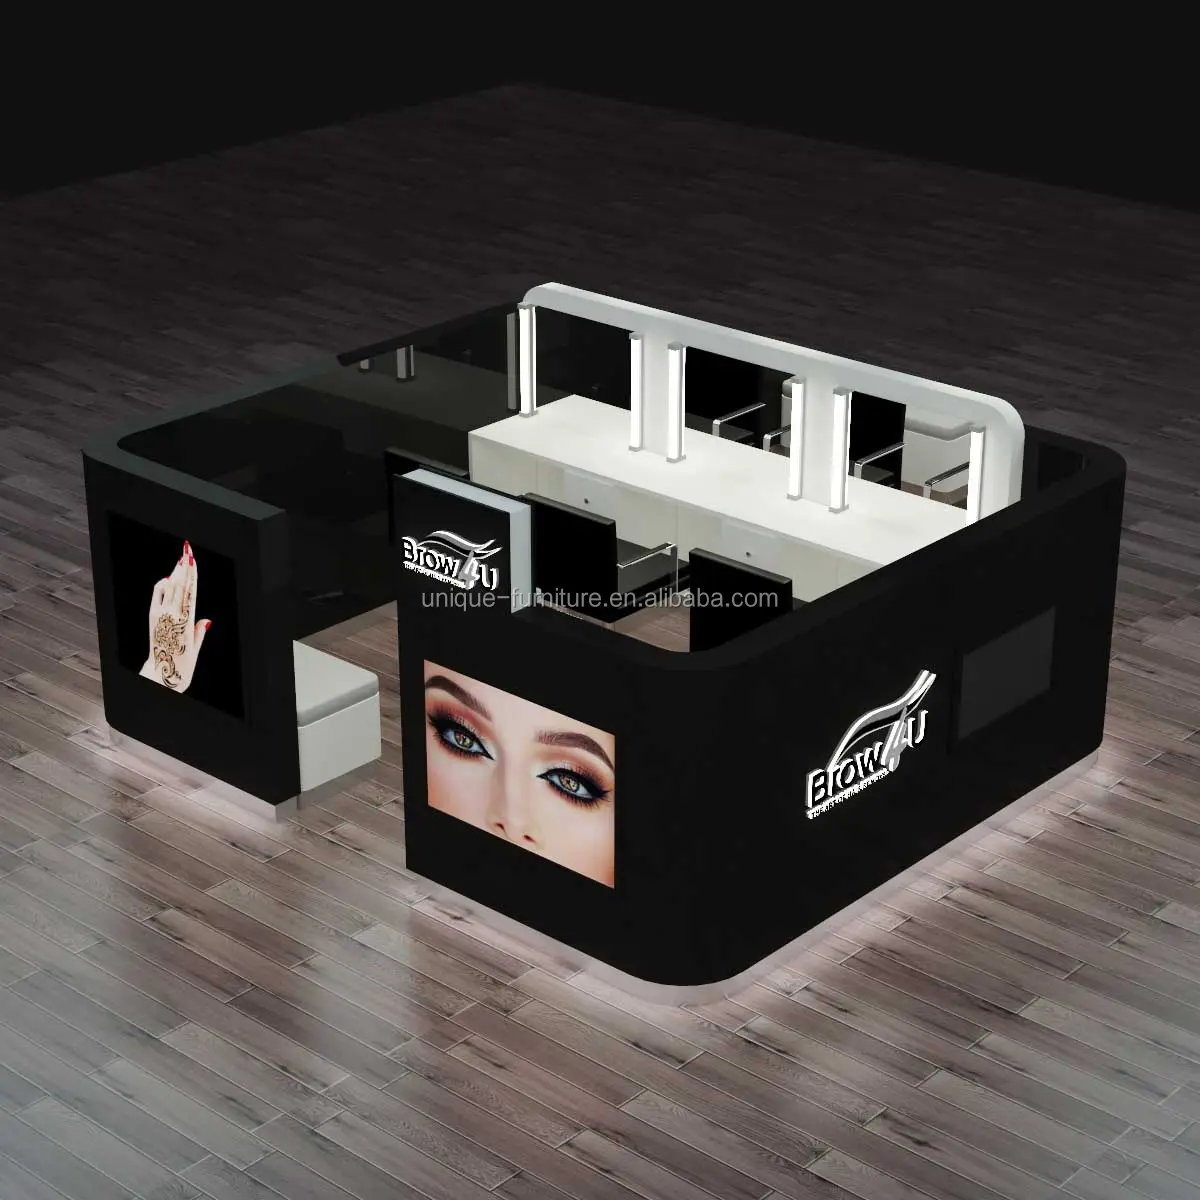 Customize Eyebrow Threading Working Station with Chair Wood Brow Bar Counter Eyebrow Lamination Studio Beauty Salon Shop in Mall